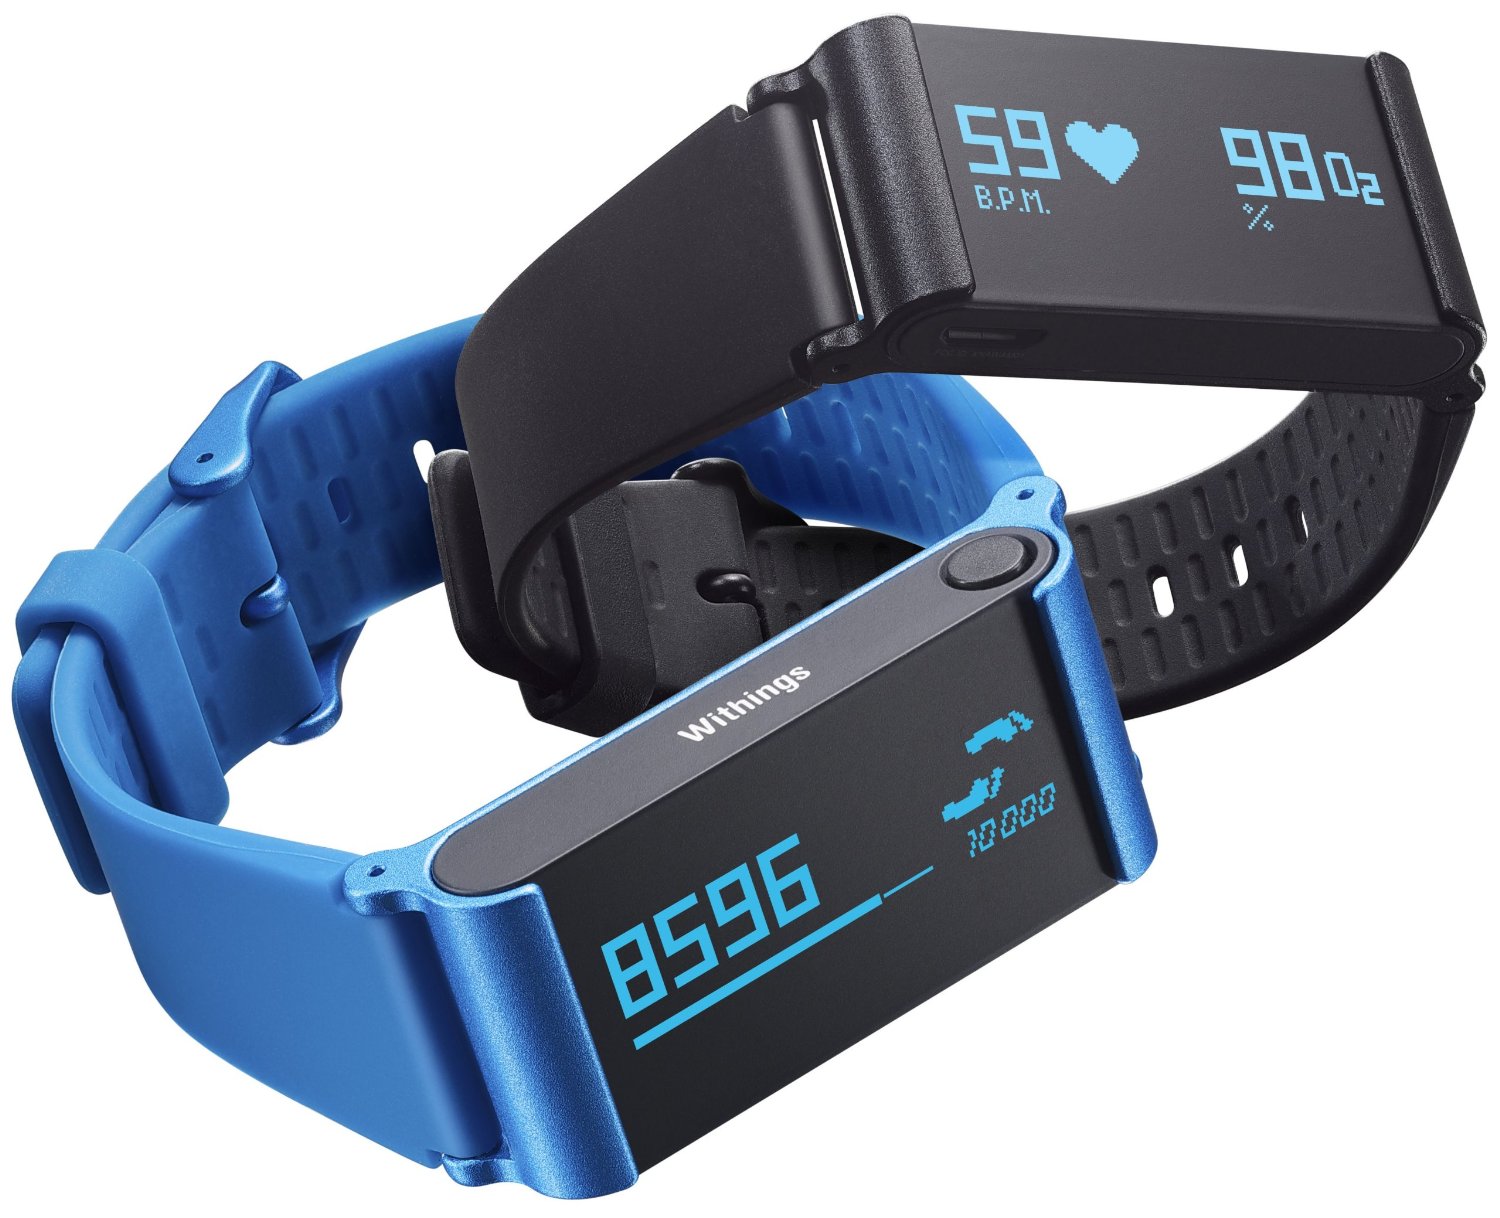 healthmate and fitbit